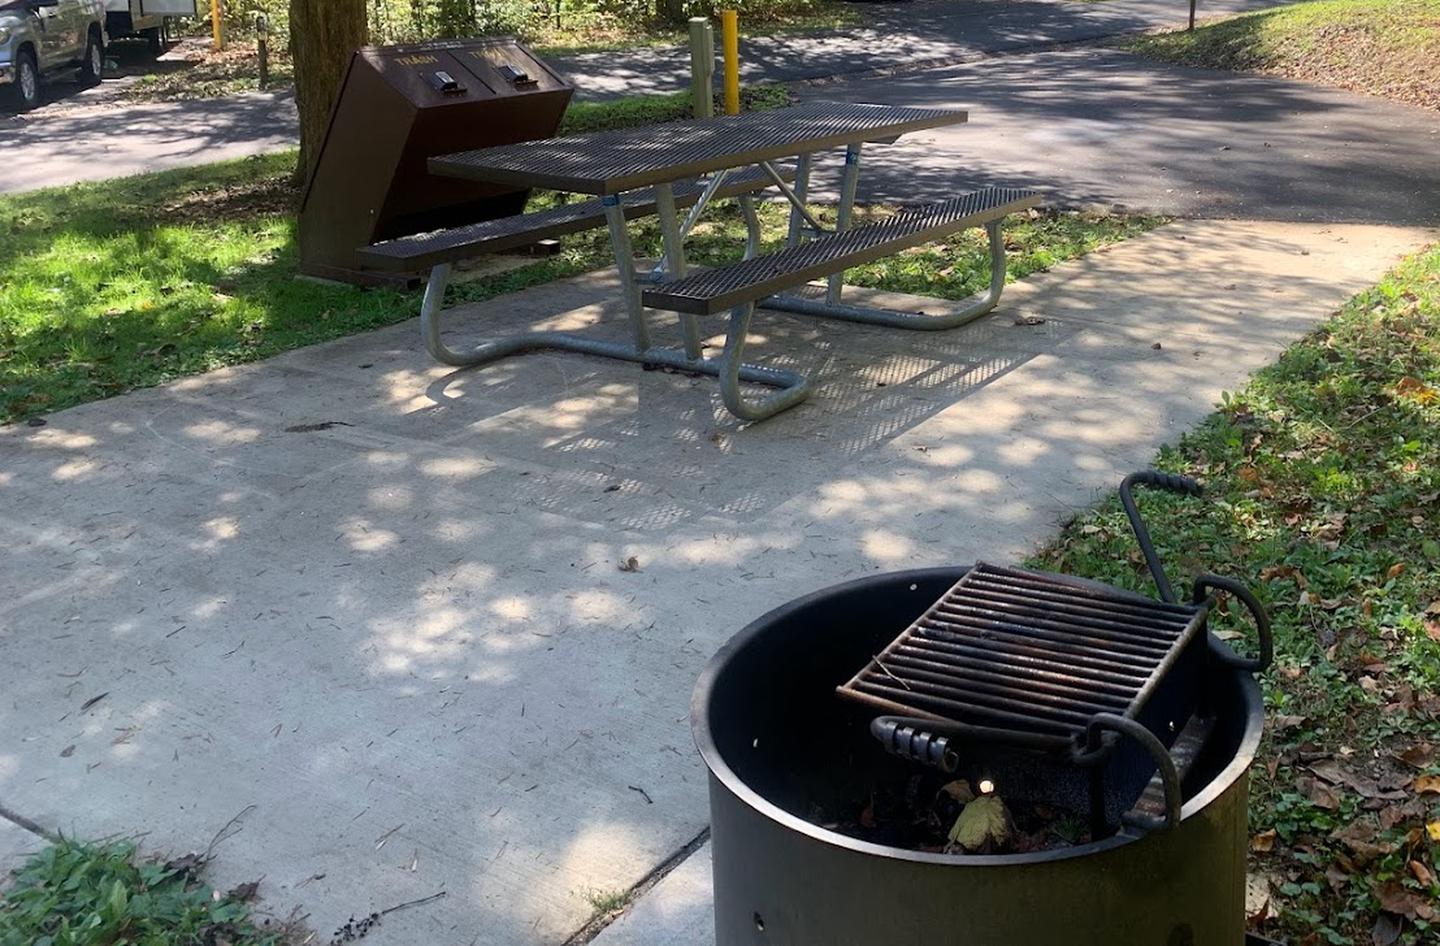 A concrete area with a grill, picnic table, circle fire ring, and a brown bear proof trash can with an under handle push lift.B-8 has a fire ring, grill, and picnic table.